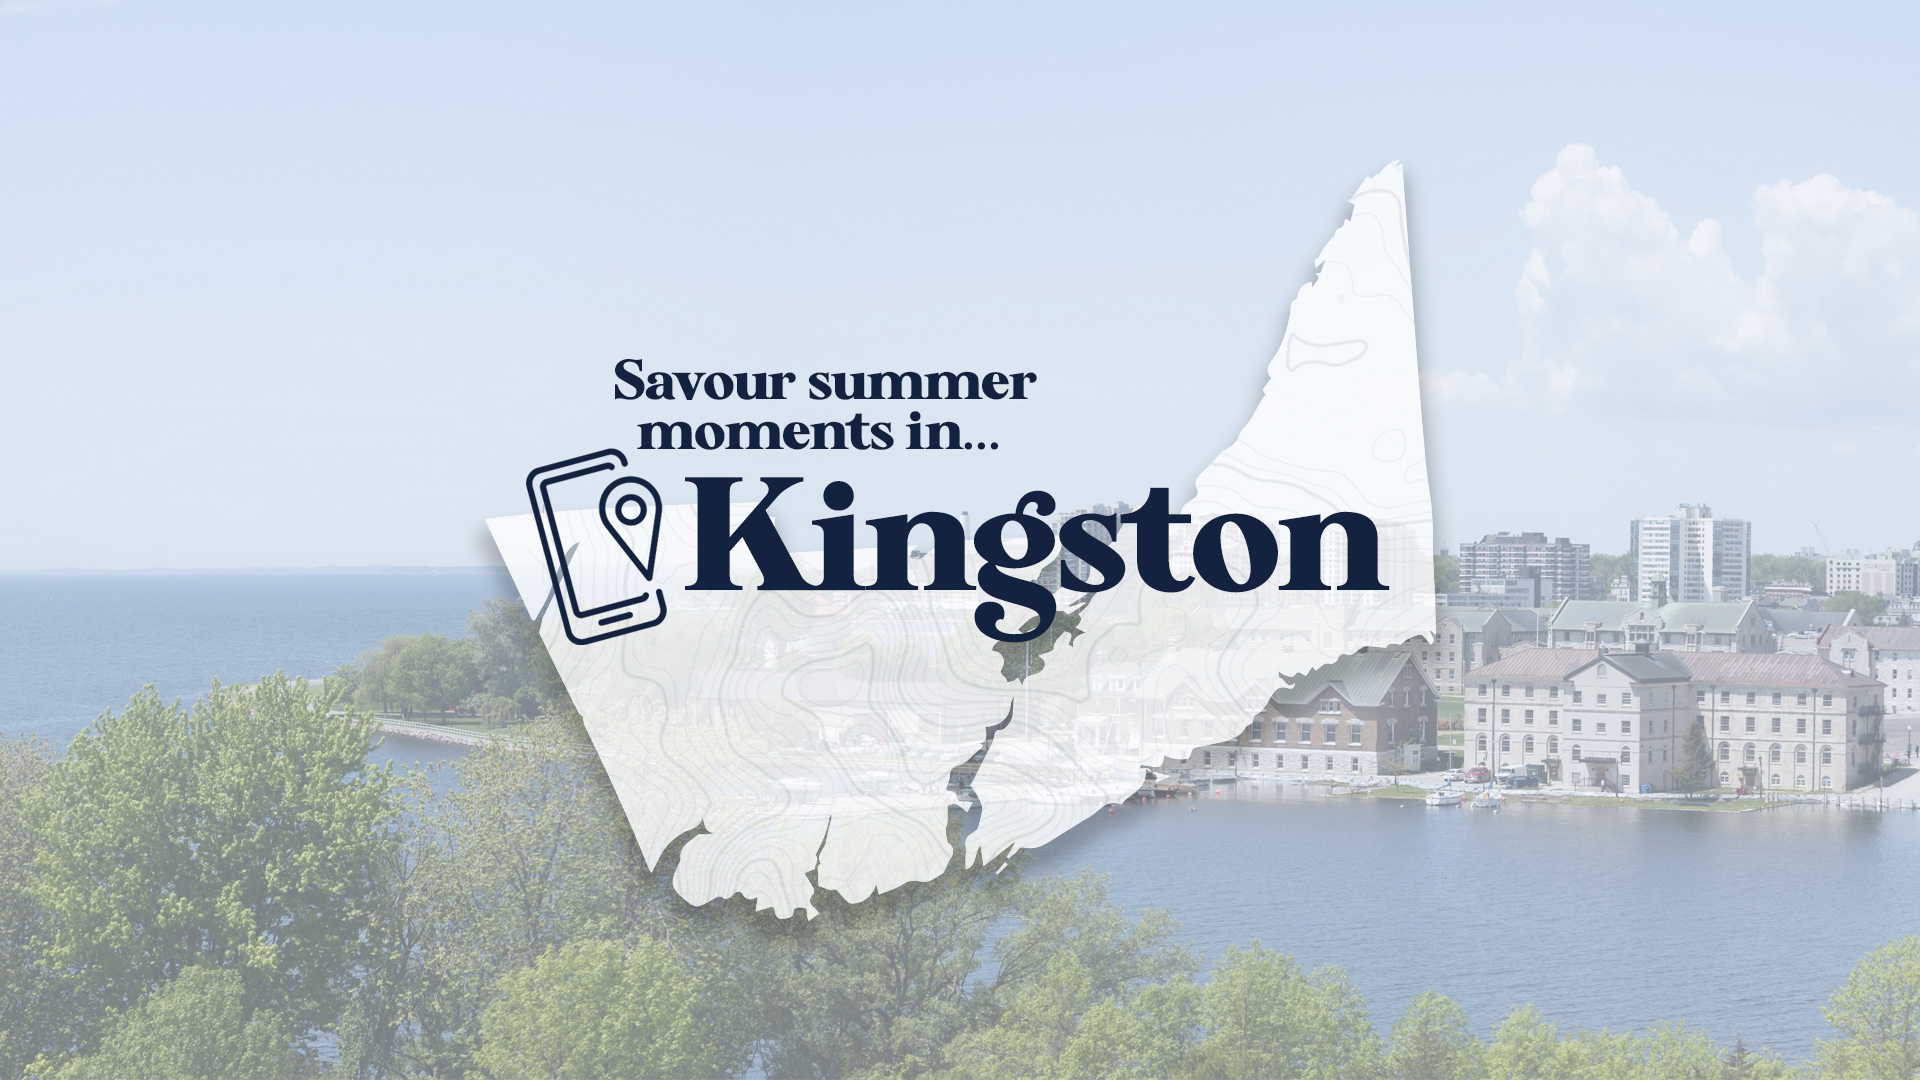 Savour Summer Moments in Kingston logo over top of an image of the Kingston Waterfront.